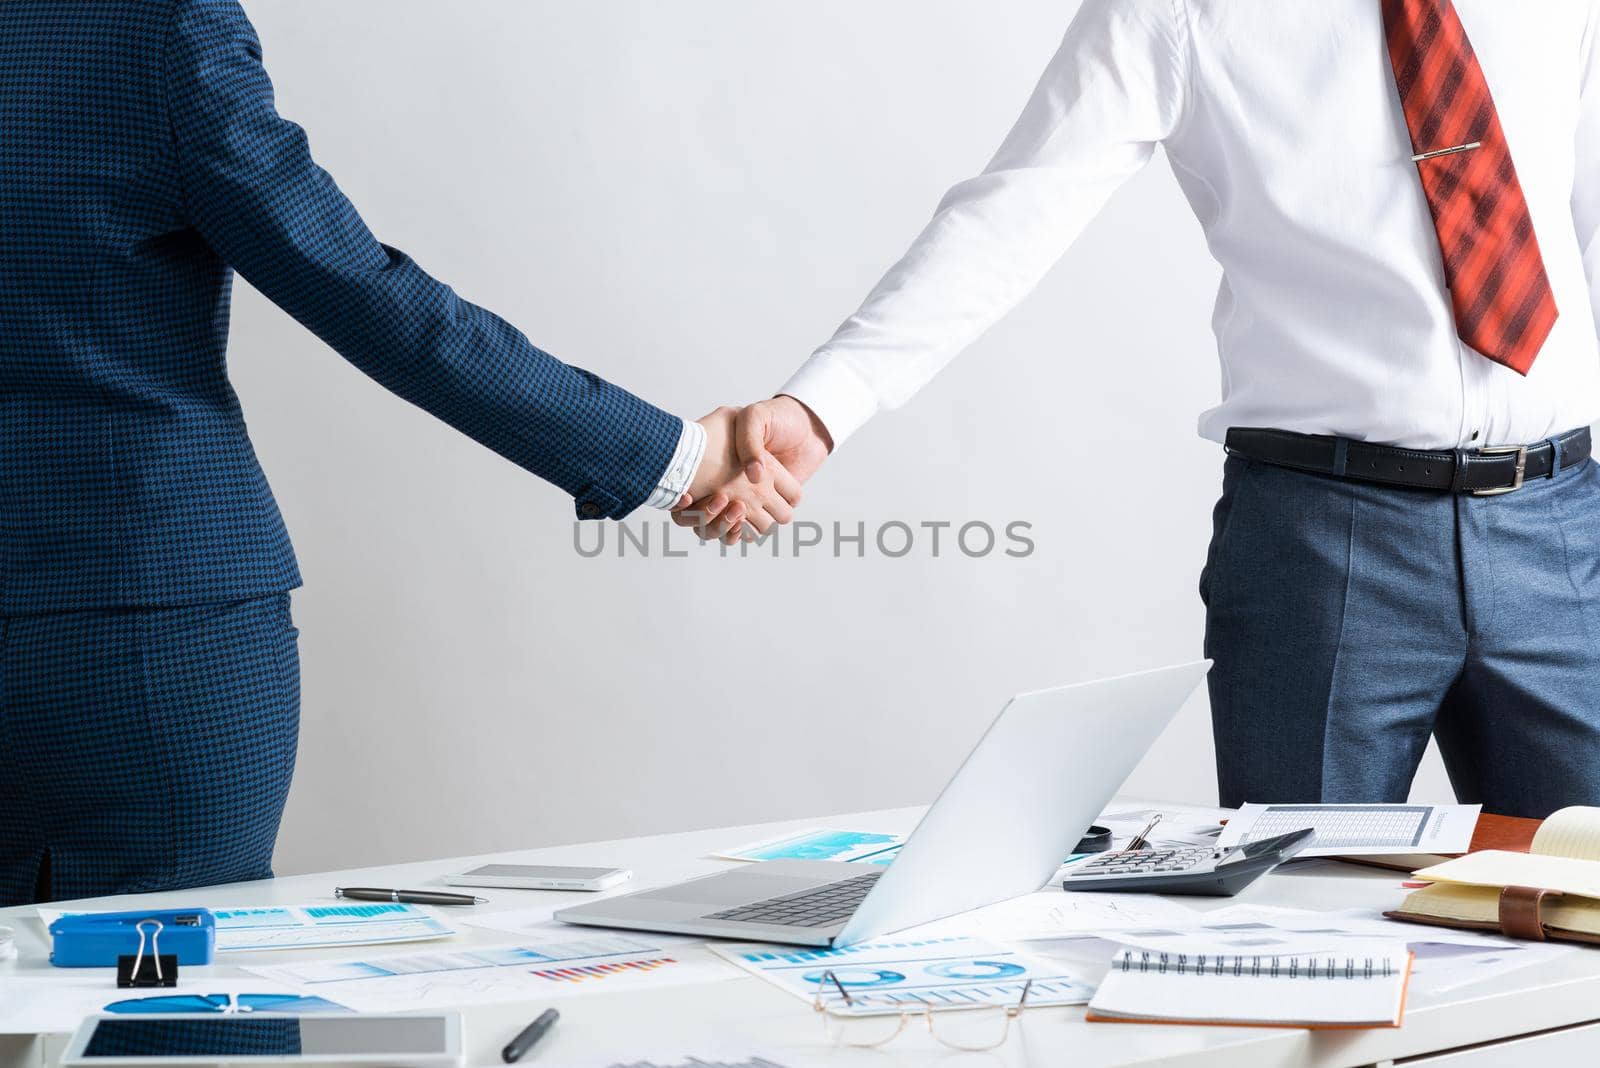 Businessman and businesswoman handshaking after good deal. Business consultation and cooperation in office. Corporate teamwork and partnership. Businesspersons greeting or finishing successful meeting